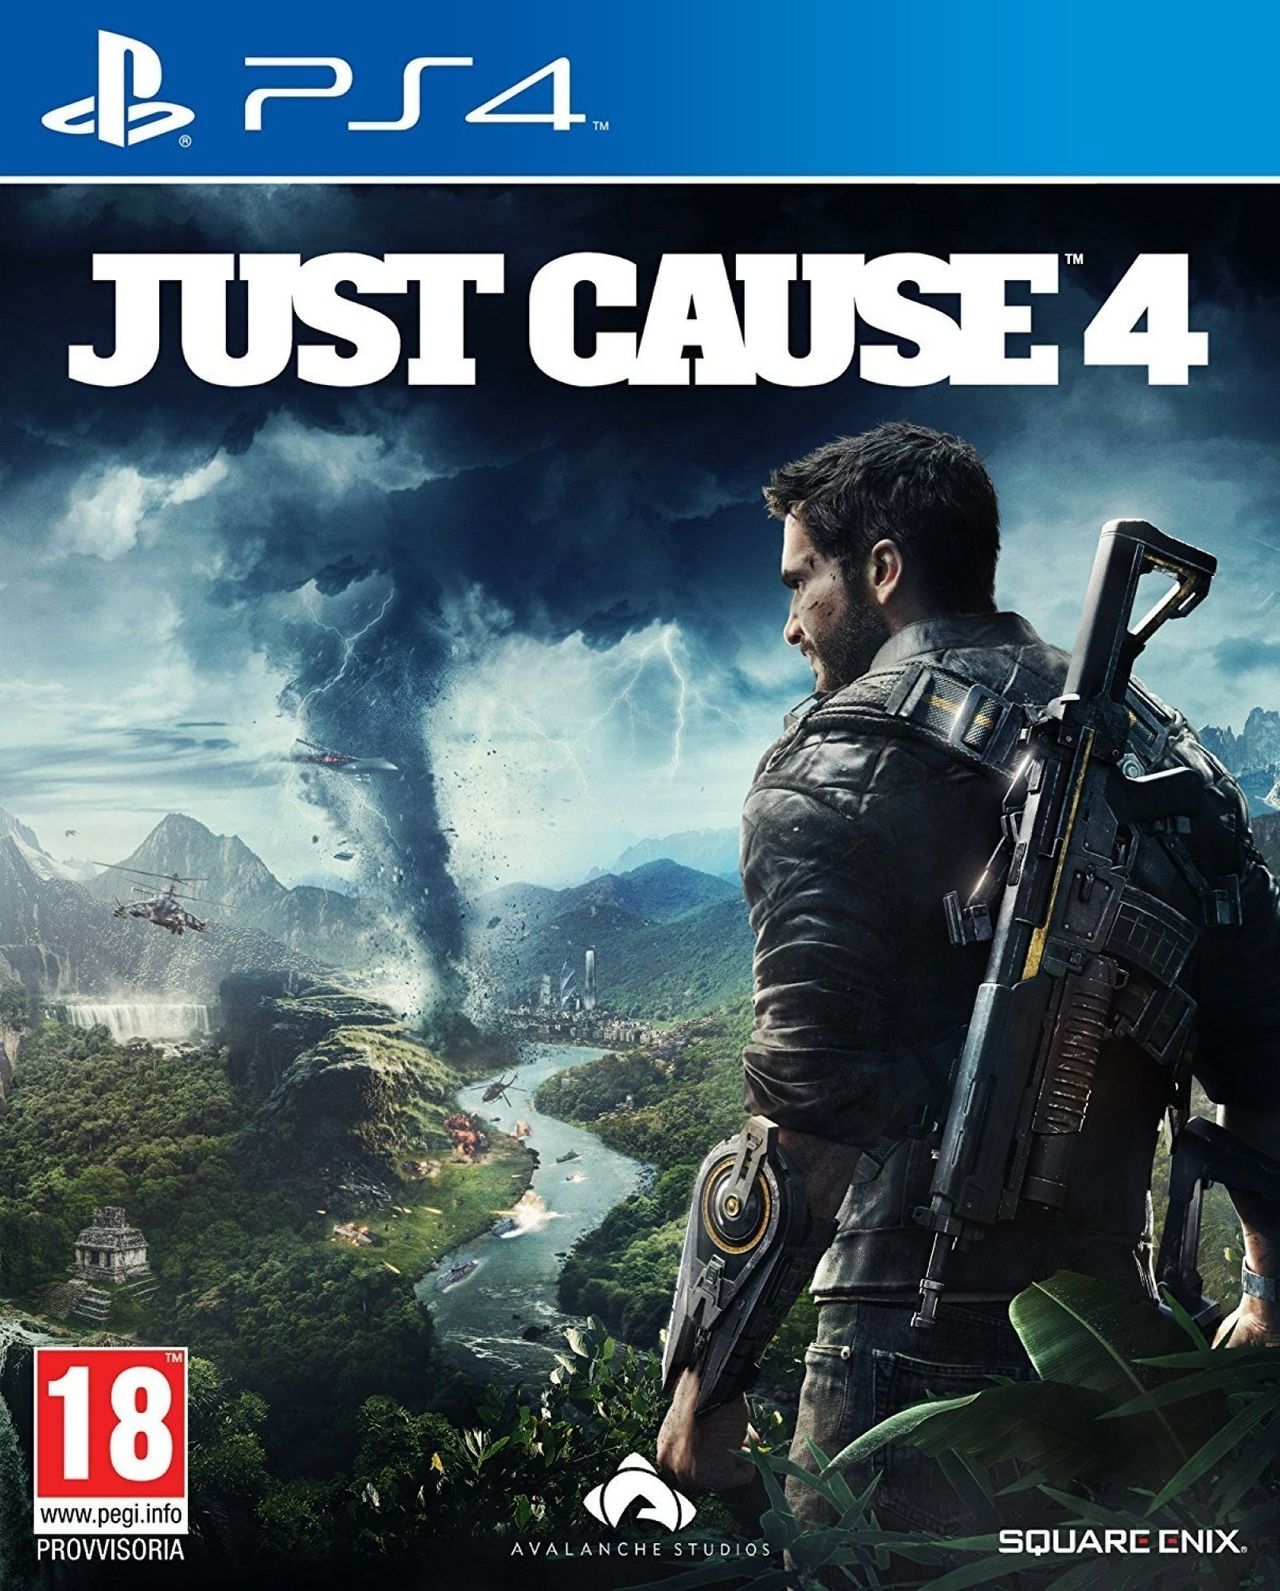 just-cause-4-videojuego-ps4-pc-y-xbox-one-vandal